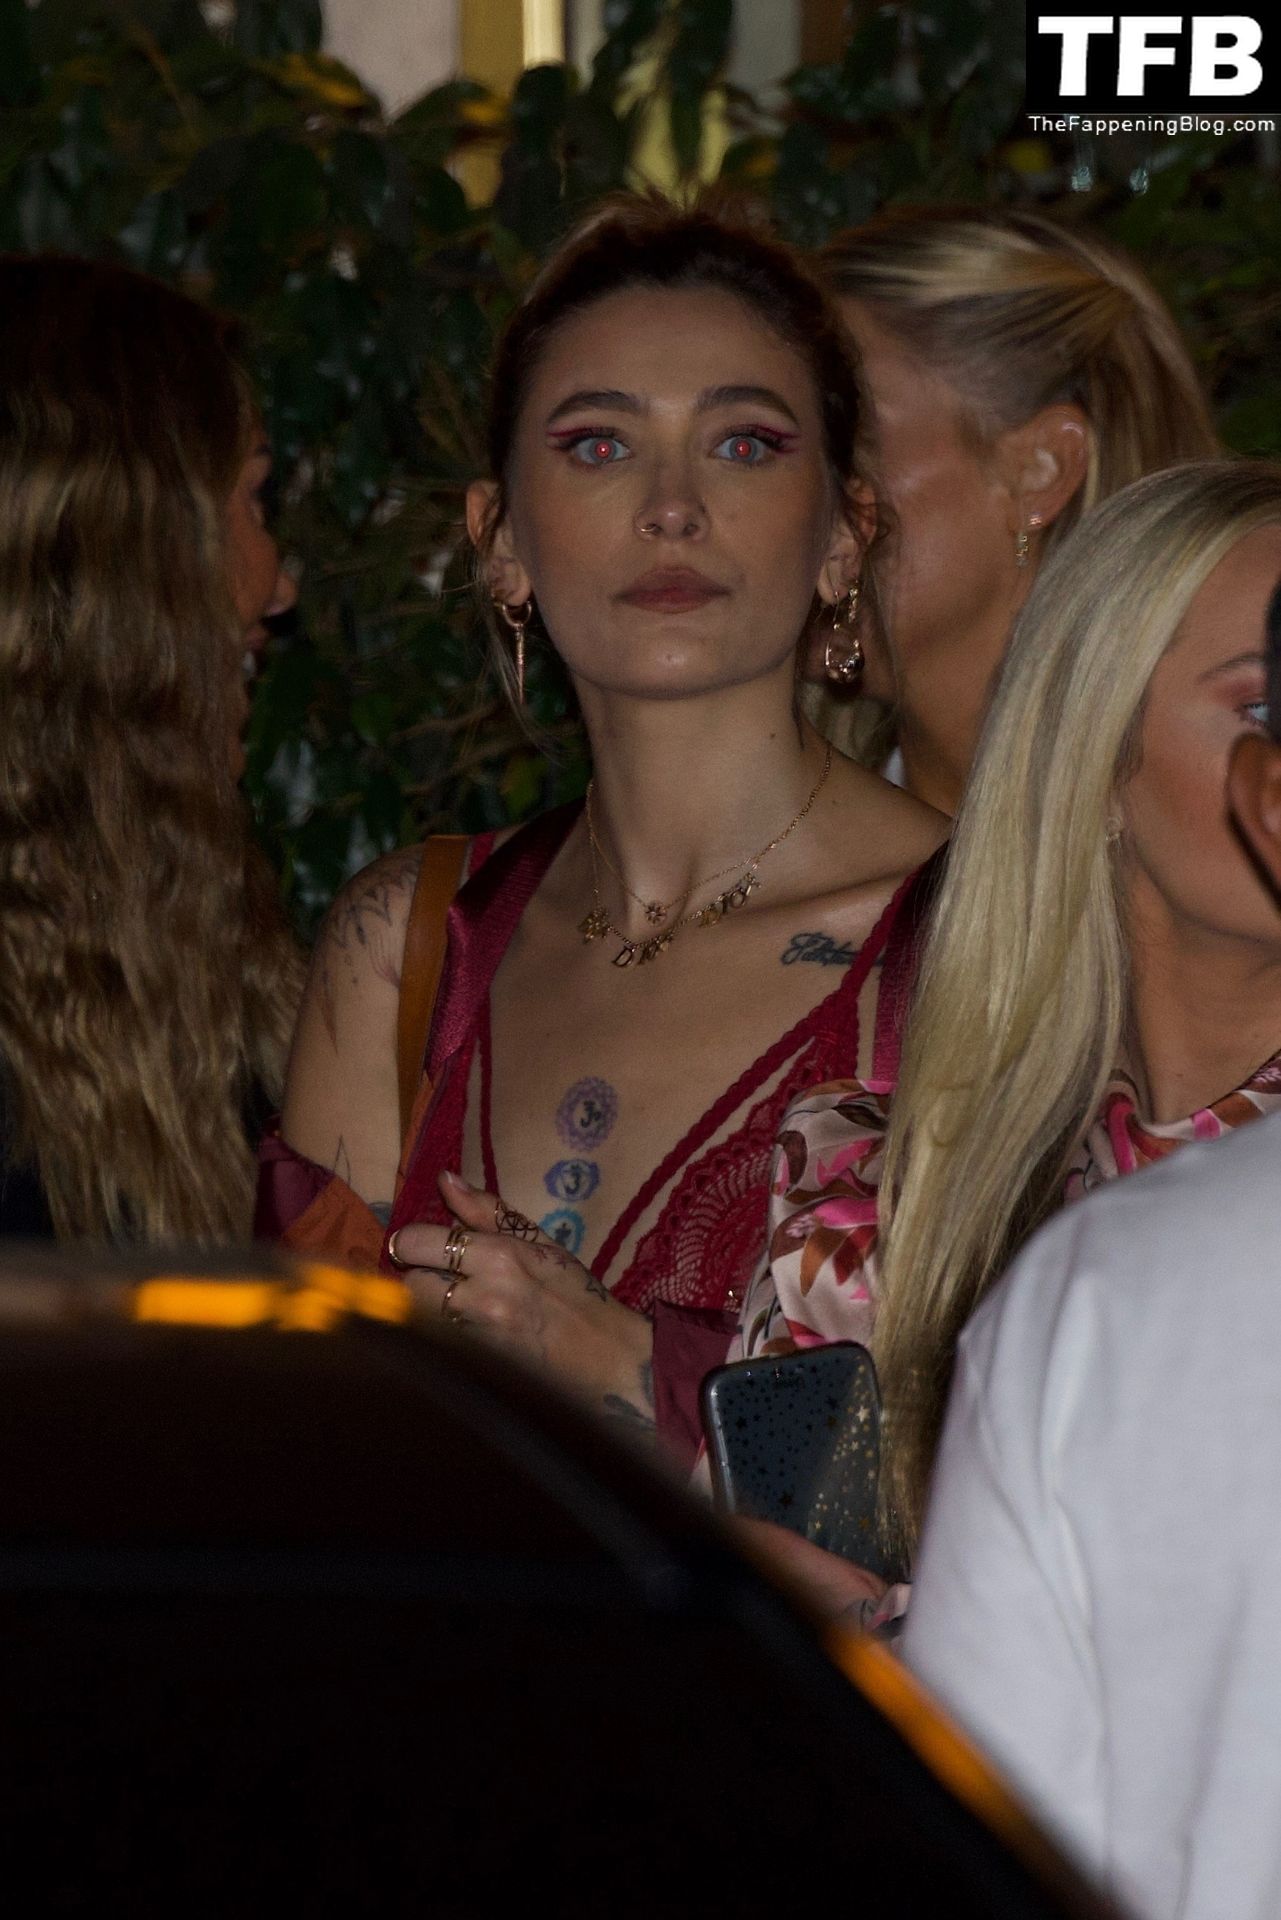 Paris Jackson See Through Nudity The Fappening Blog 18 - Paris Jackson Flashes Her Nude Tits Wearing a See-Through Bra in WeHo (34 Photos)